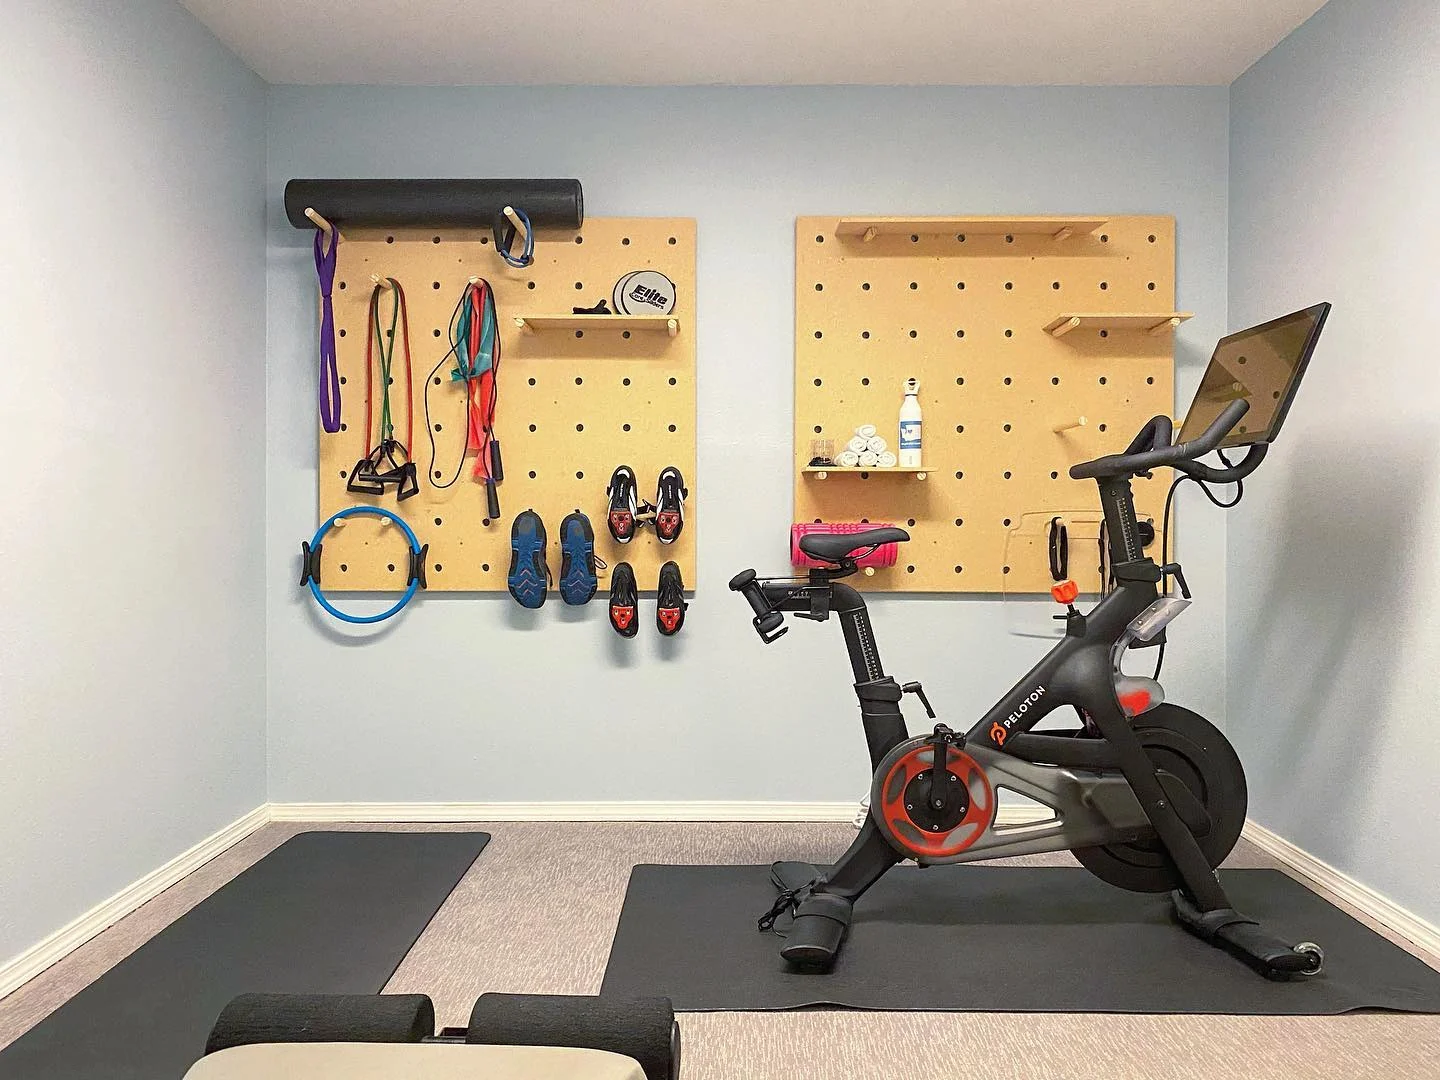 small pelolton room with wall storage for workout equipment